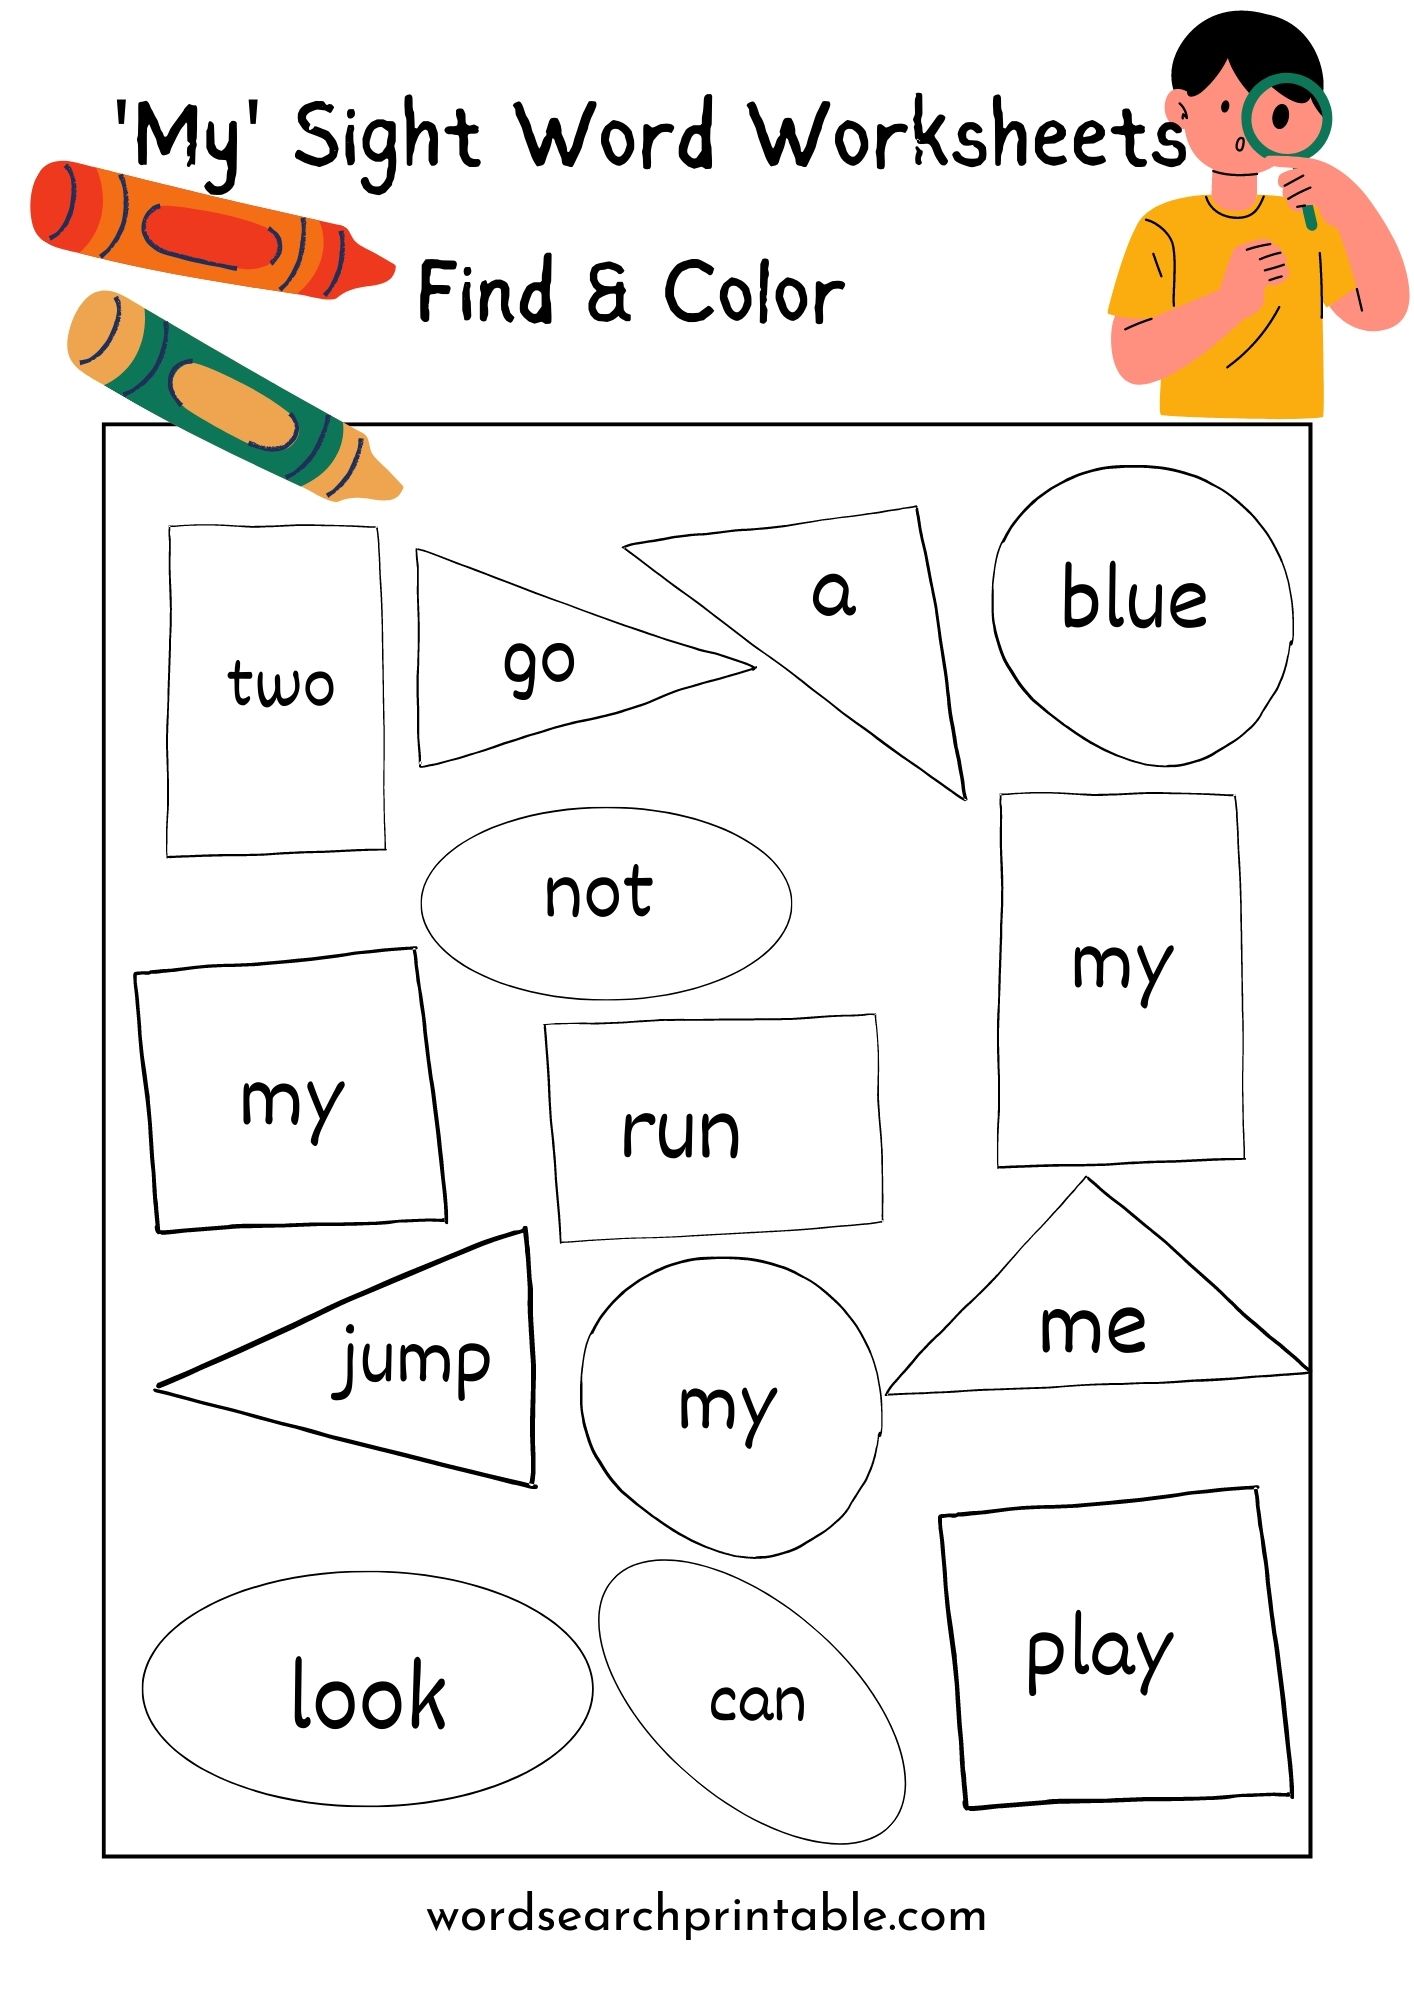 Find the sight word My and Color the geometric shape